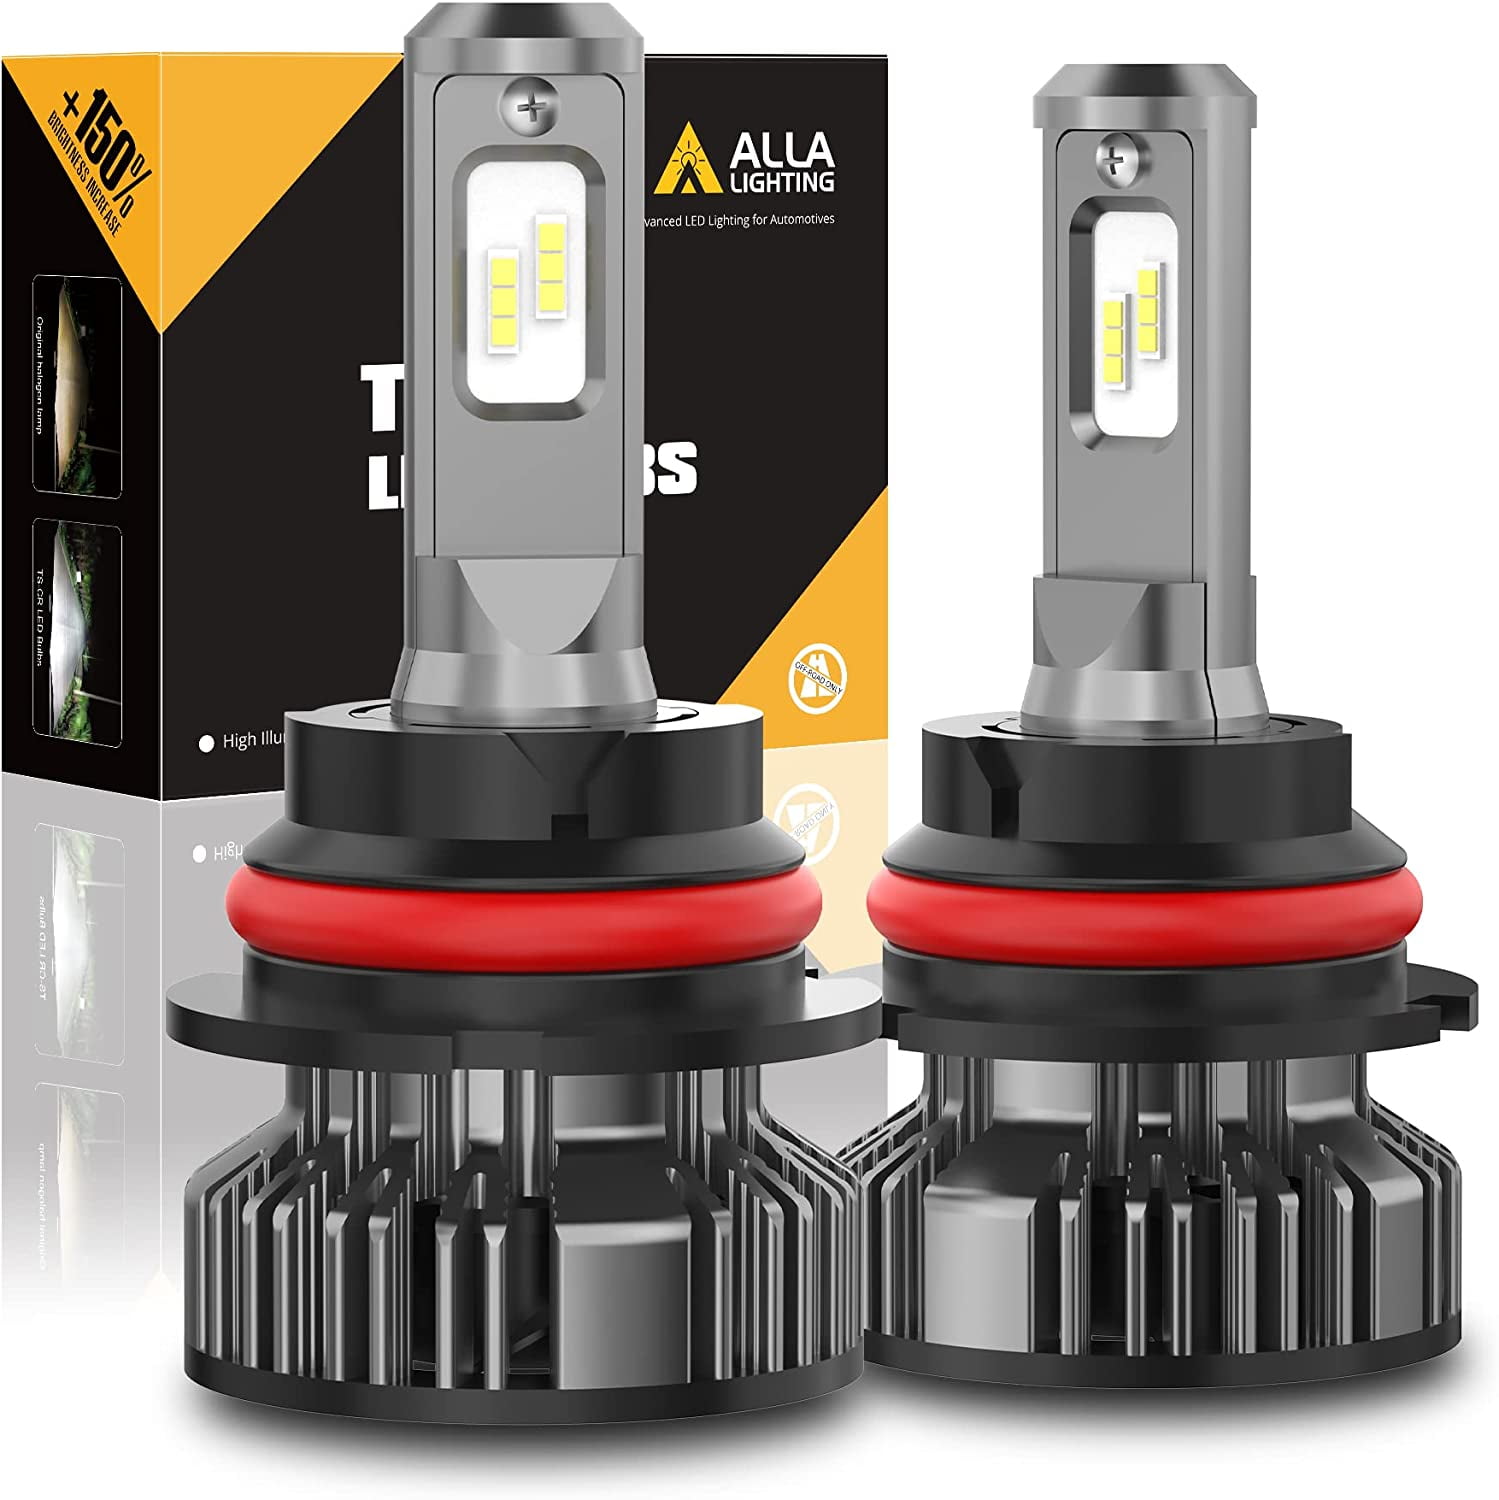 ALLA Lighting TS-CR Headlights Combo 9005 9006 LED Bulbs Extremely Super  Bright HB3 High Beam HB4 Low Beam Replacement for Cars, Trucks, 6000K Xenon  White (4 Packs, 2 Sets) 